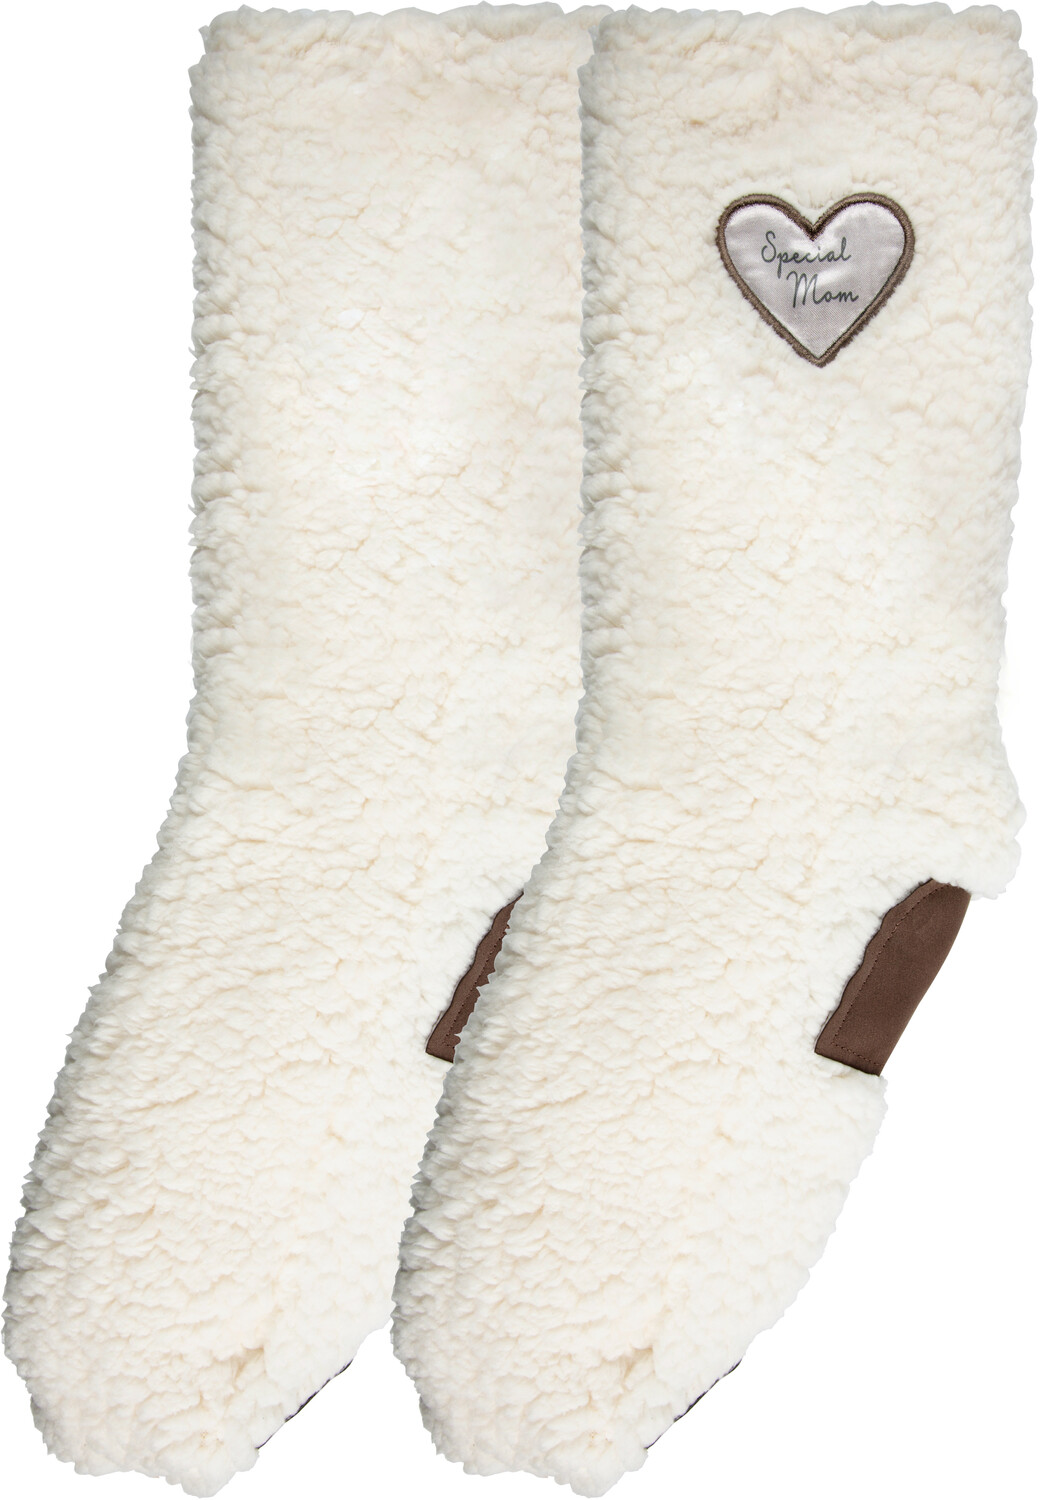 Special Mom by Comfort Collection - Special Mom - One Size Fits Most Sherpa Slipper